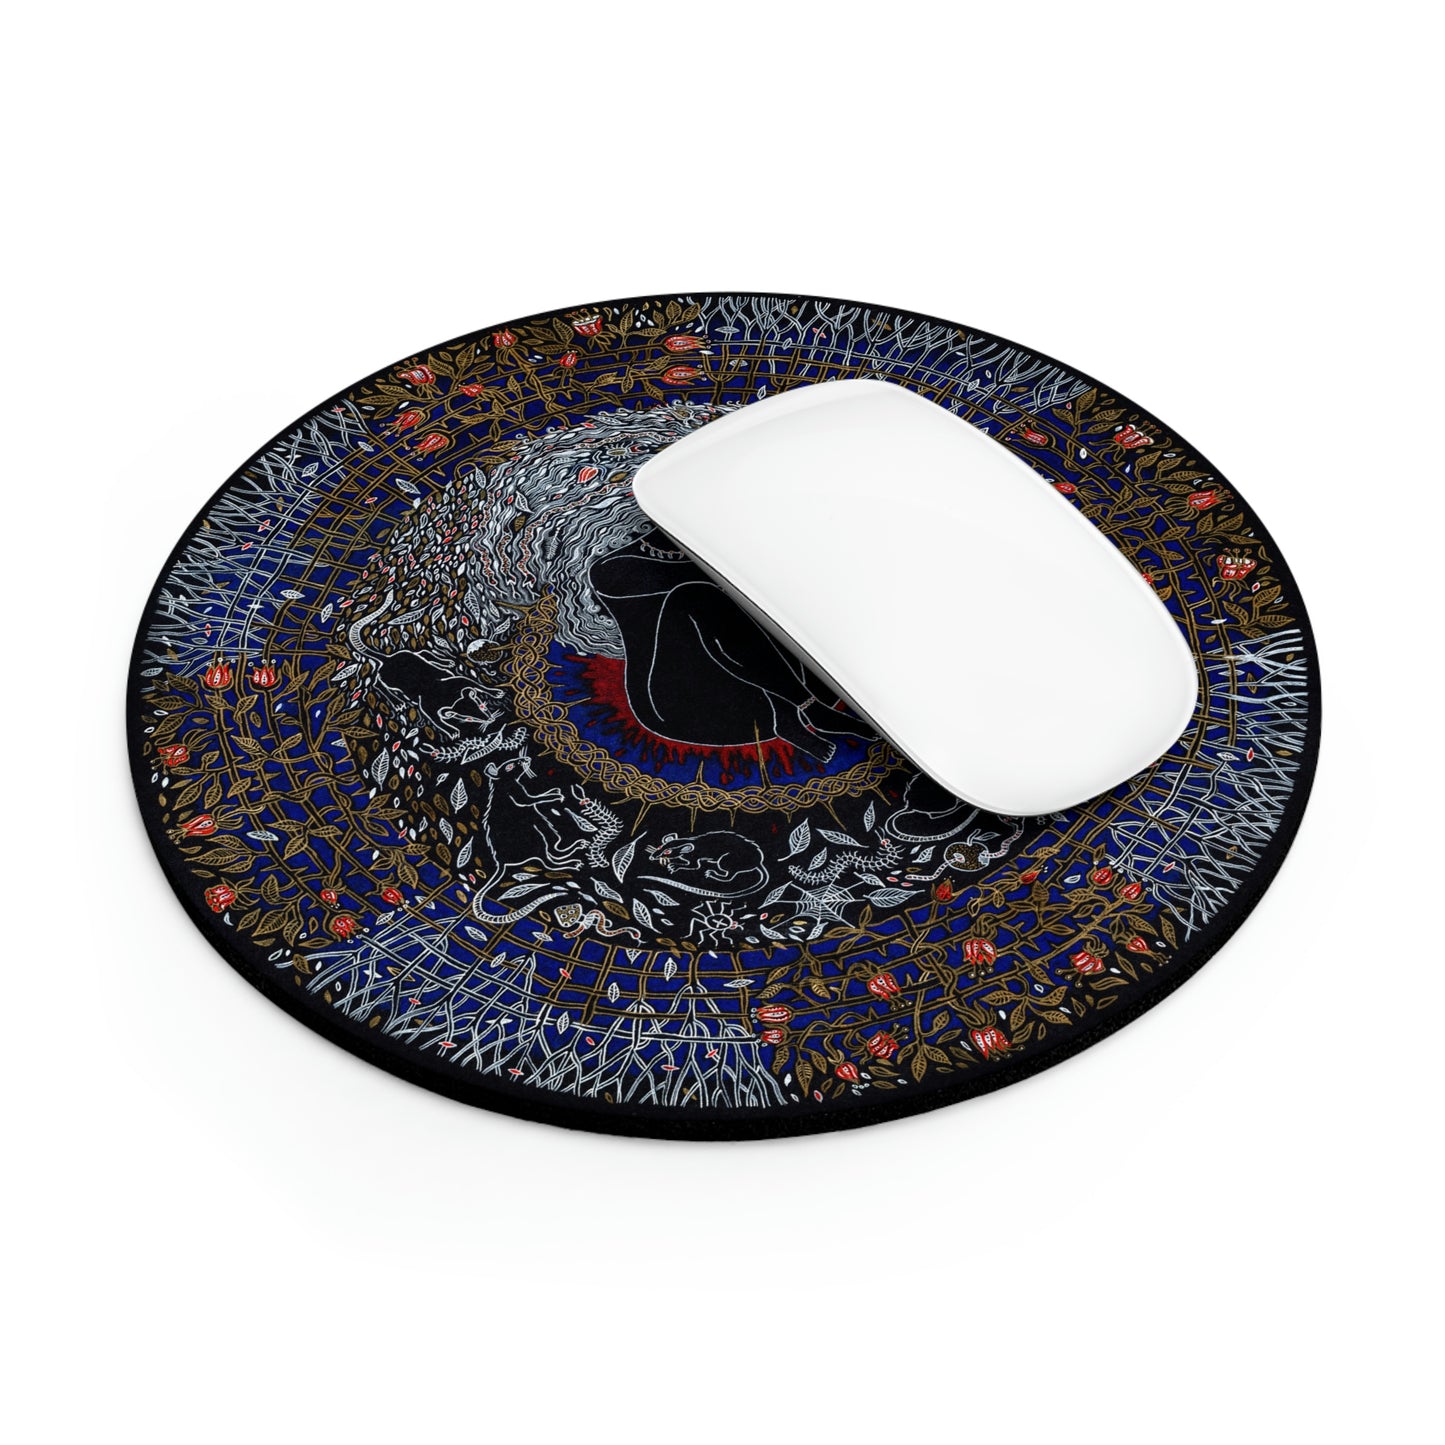 Chinese Zodiac Sign Mouse Pad (Rat)